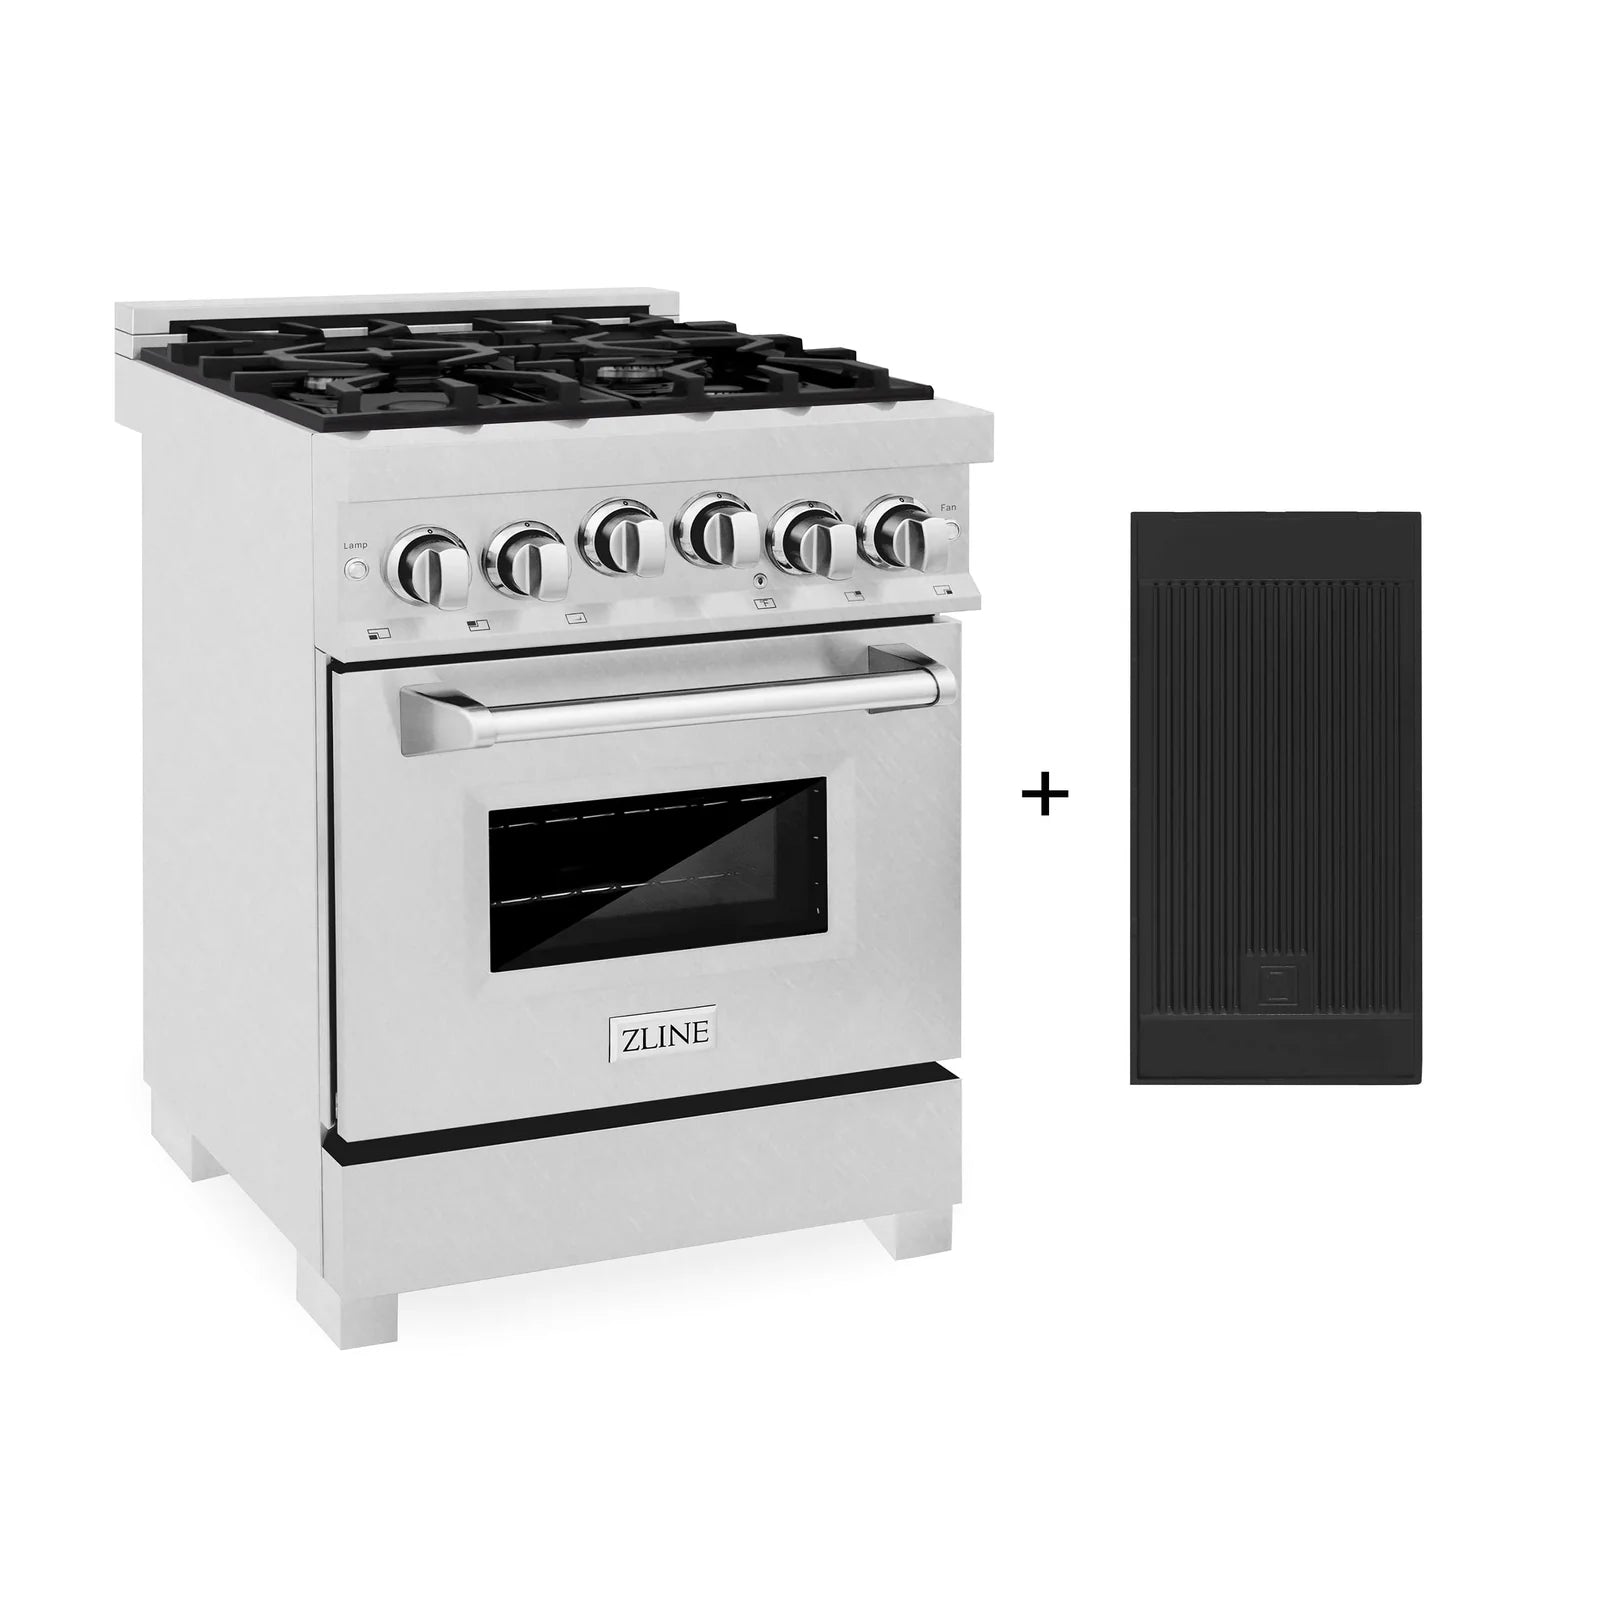 ZLINE 24-Inch Gas Range with 2.8 cu. ft. Gas Oven and Gas Cooktop with Griddle in Fingerprint Resistant Stainless Steel - RGS-SN-GR-24